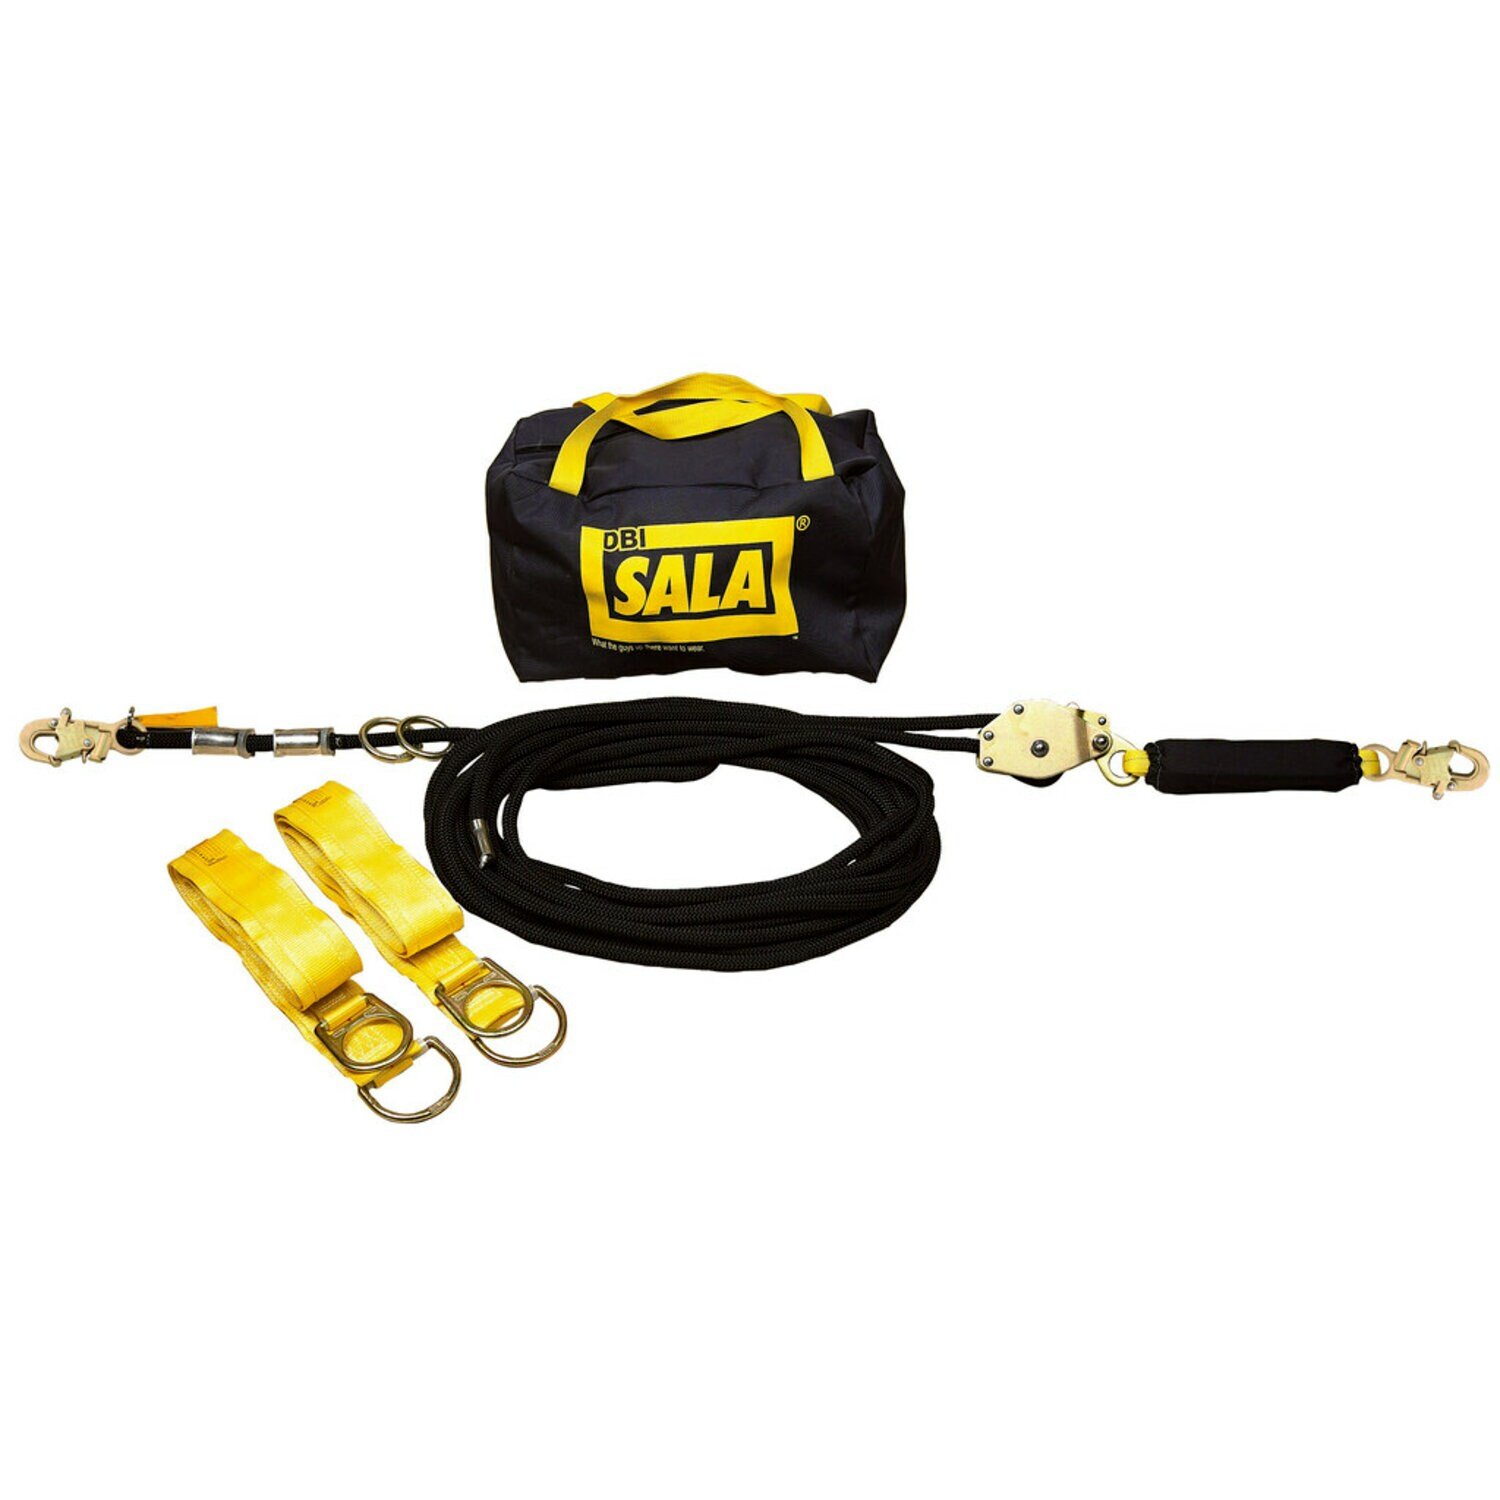 7012820304 - 3M DBI-SALA Temporary Horizontal Lifeline System with Anchors 7600702, 11/16 in Nylon Kernmantle Rope, 30 ft